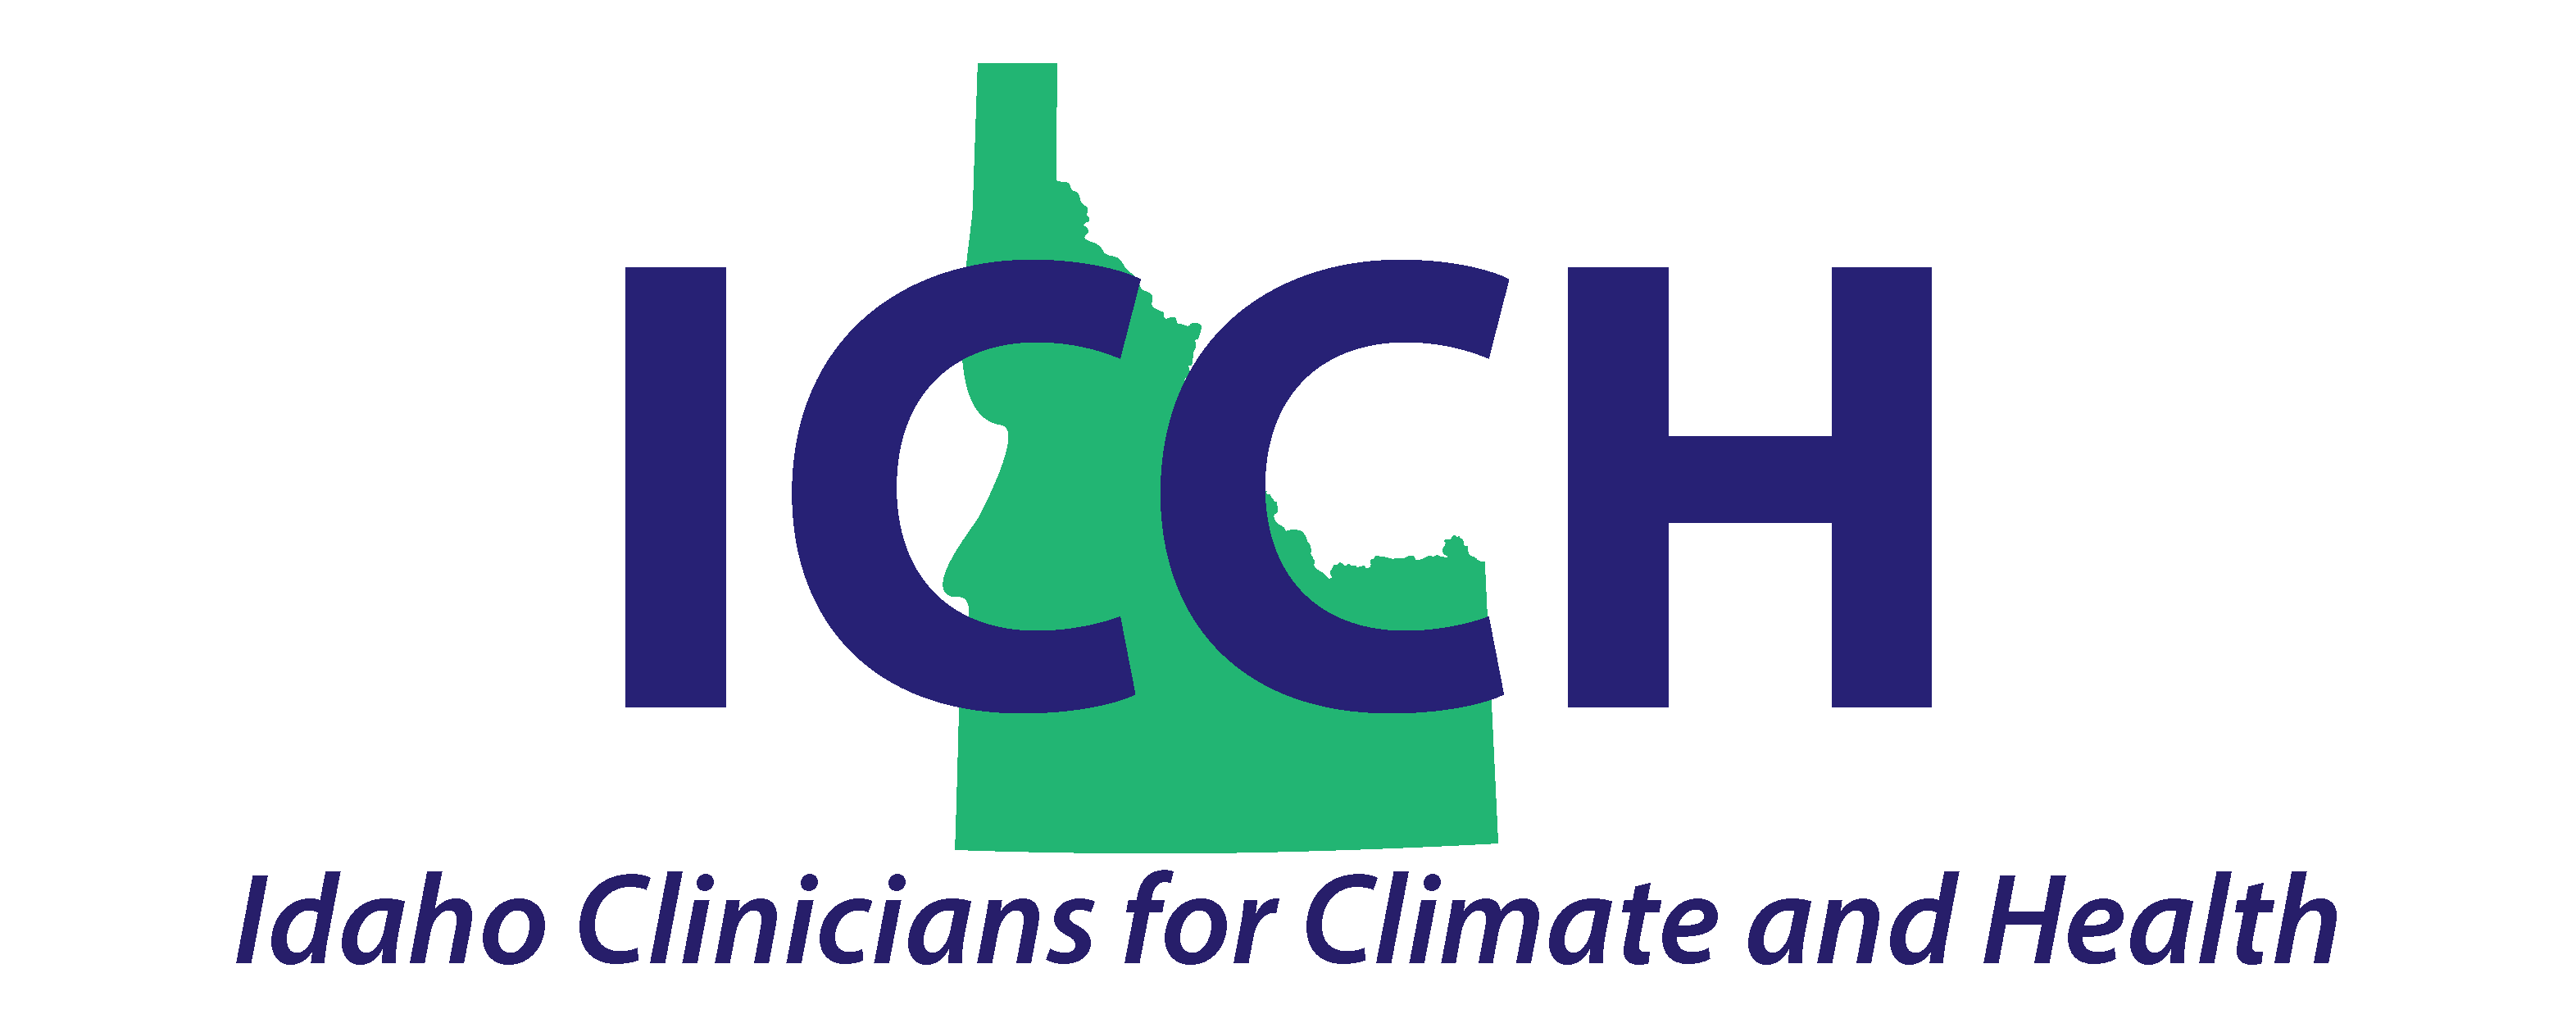 Idaho Clinicians for Climate and Health